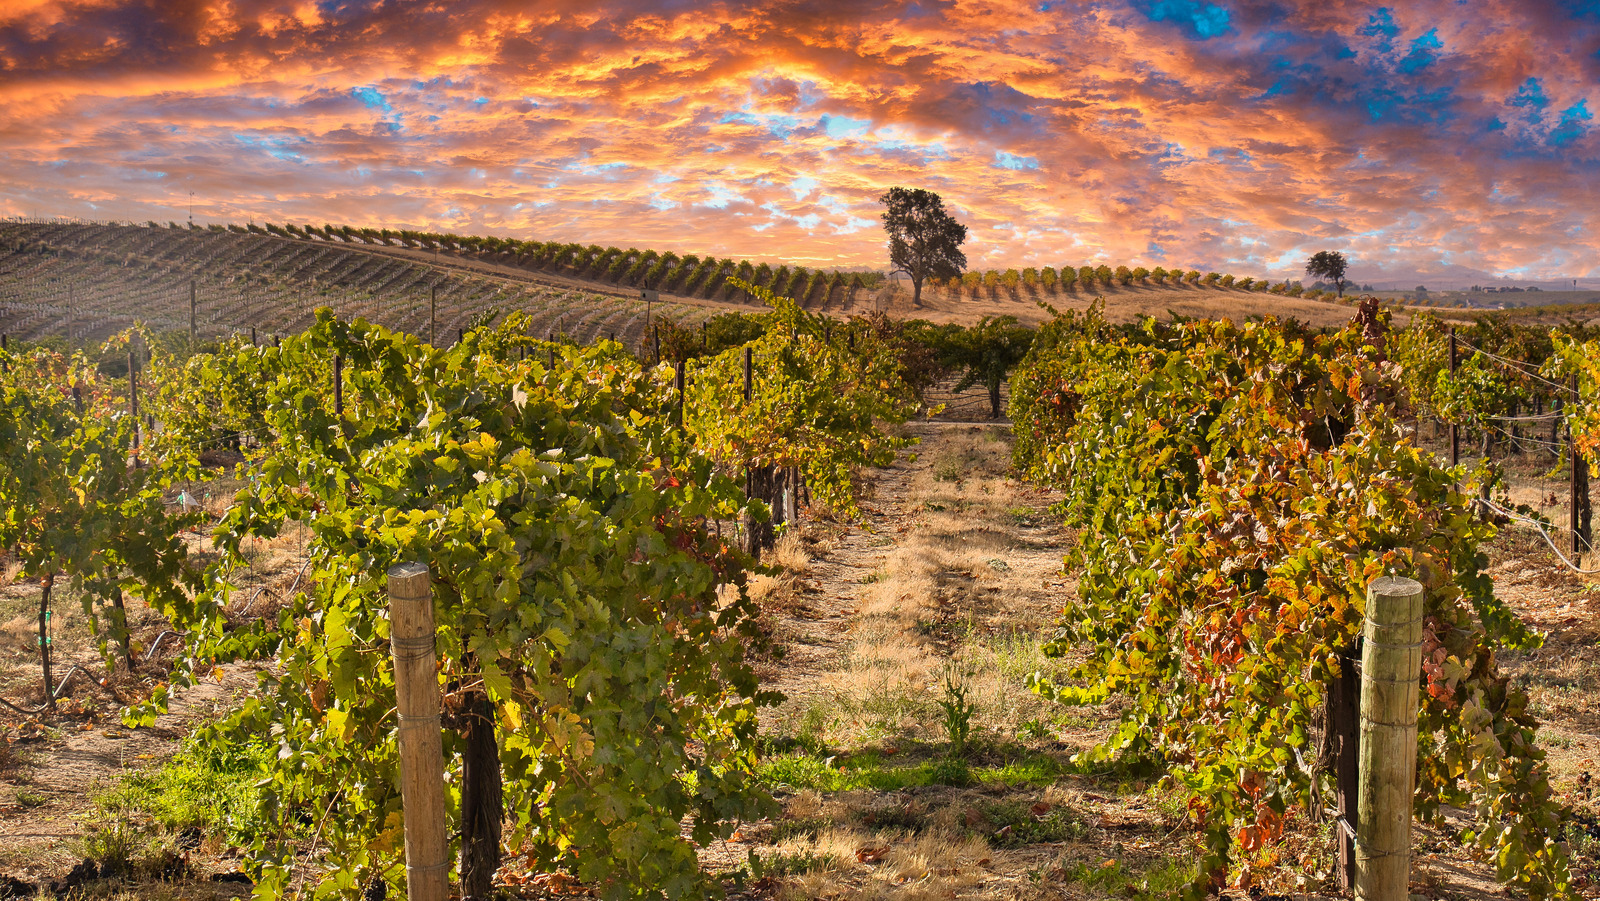 The Beginner's Guide To California's Paso Robles Wine